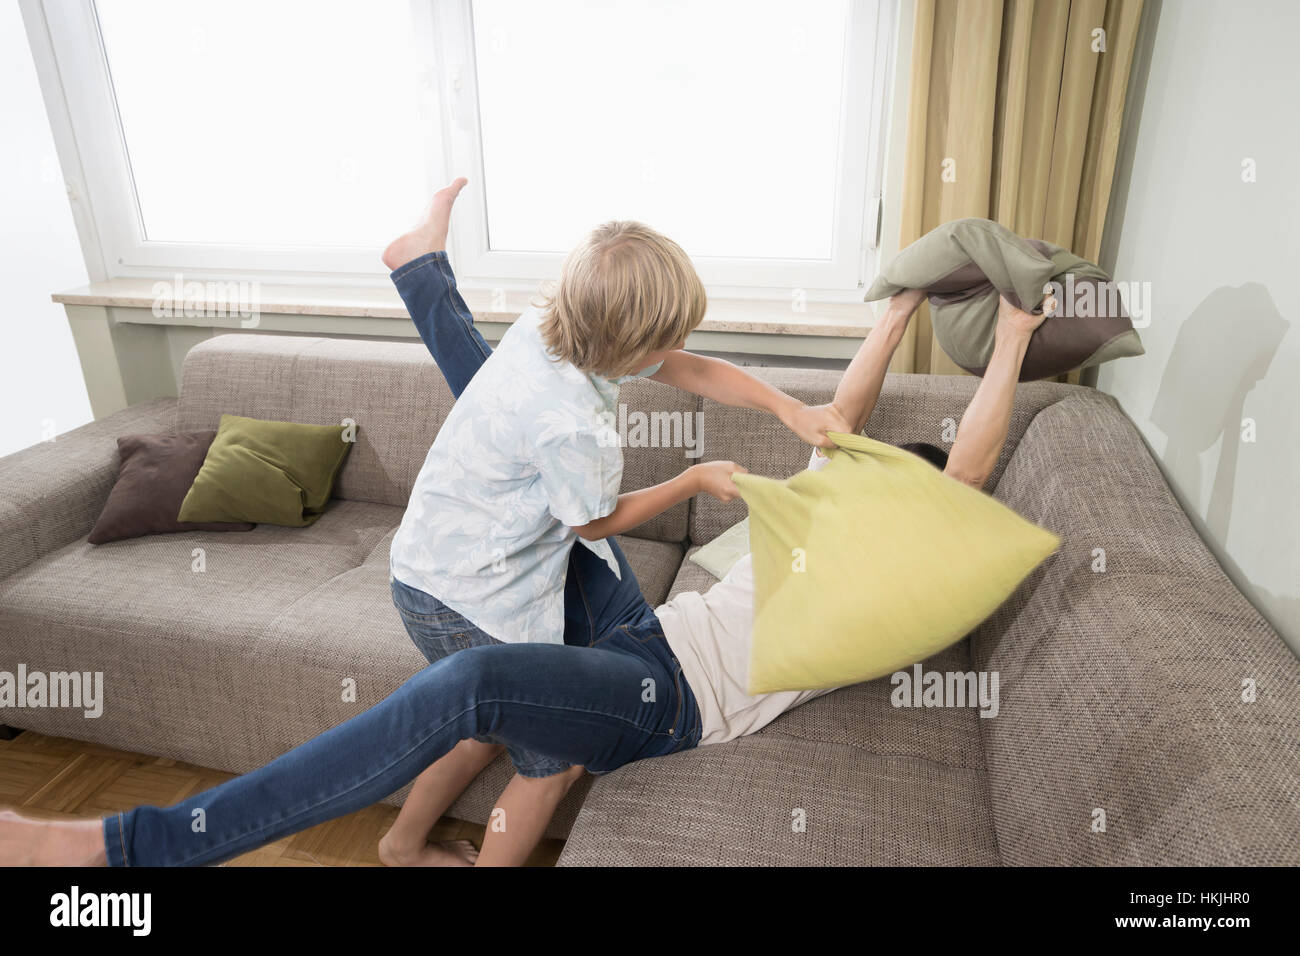 Woman pillow fighting with her son in living room,Bavaria,Germany Stock Photo